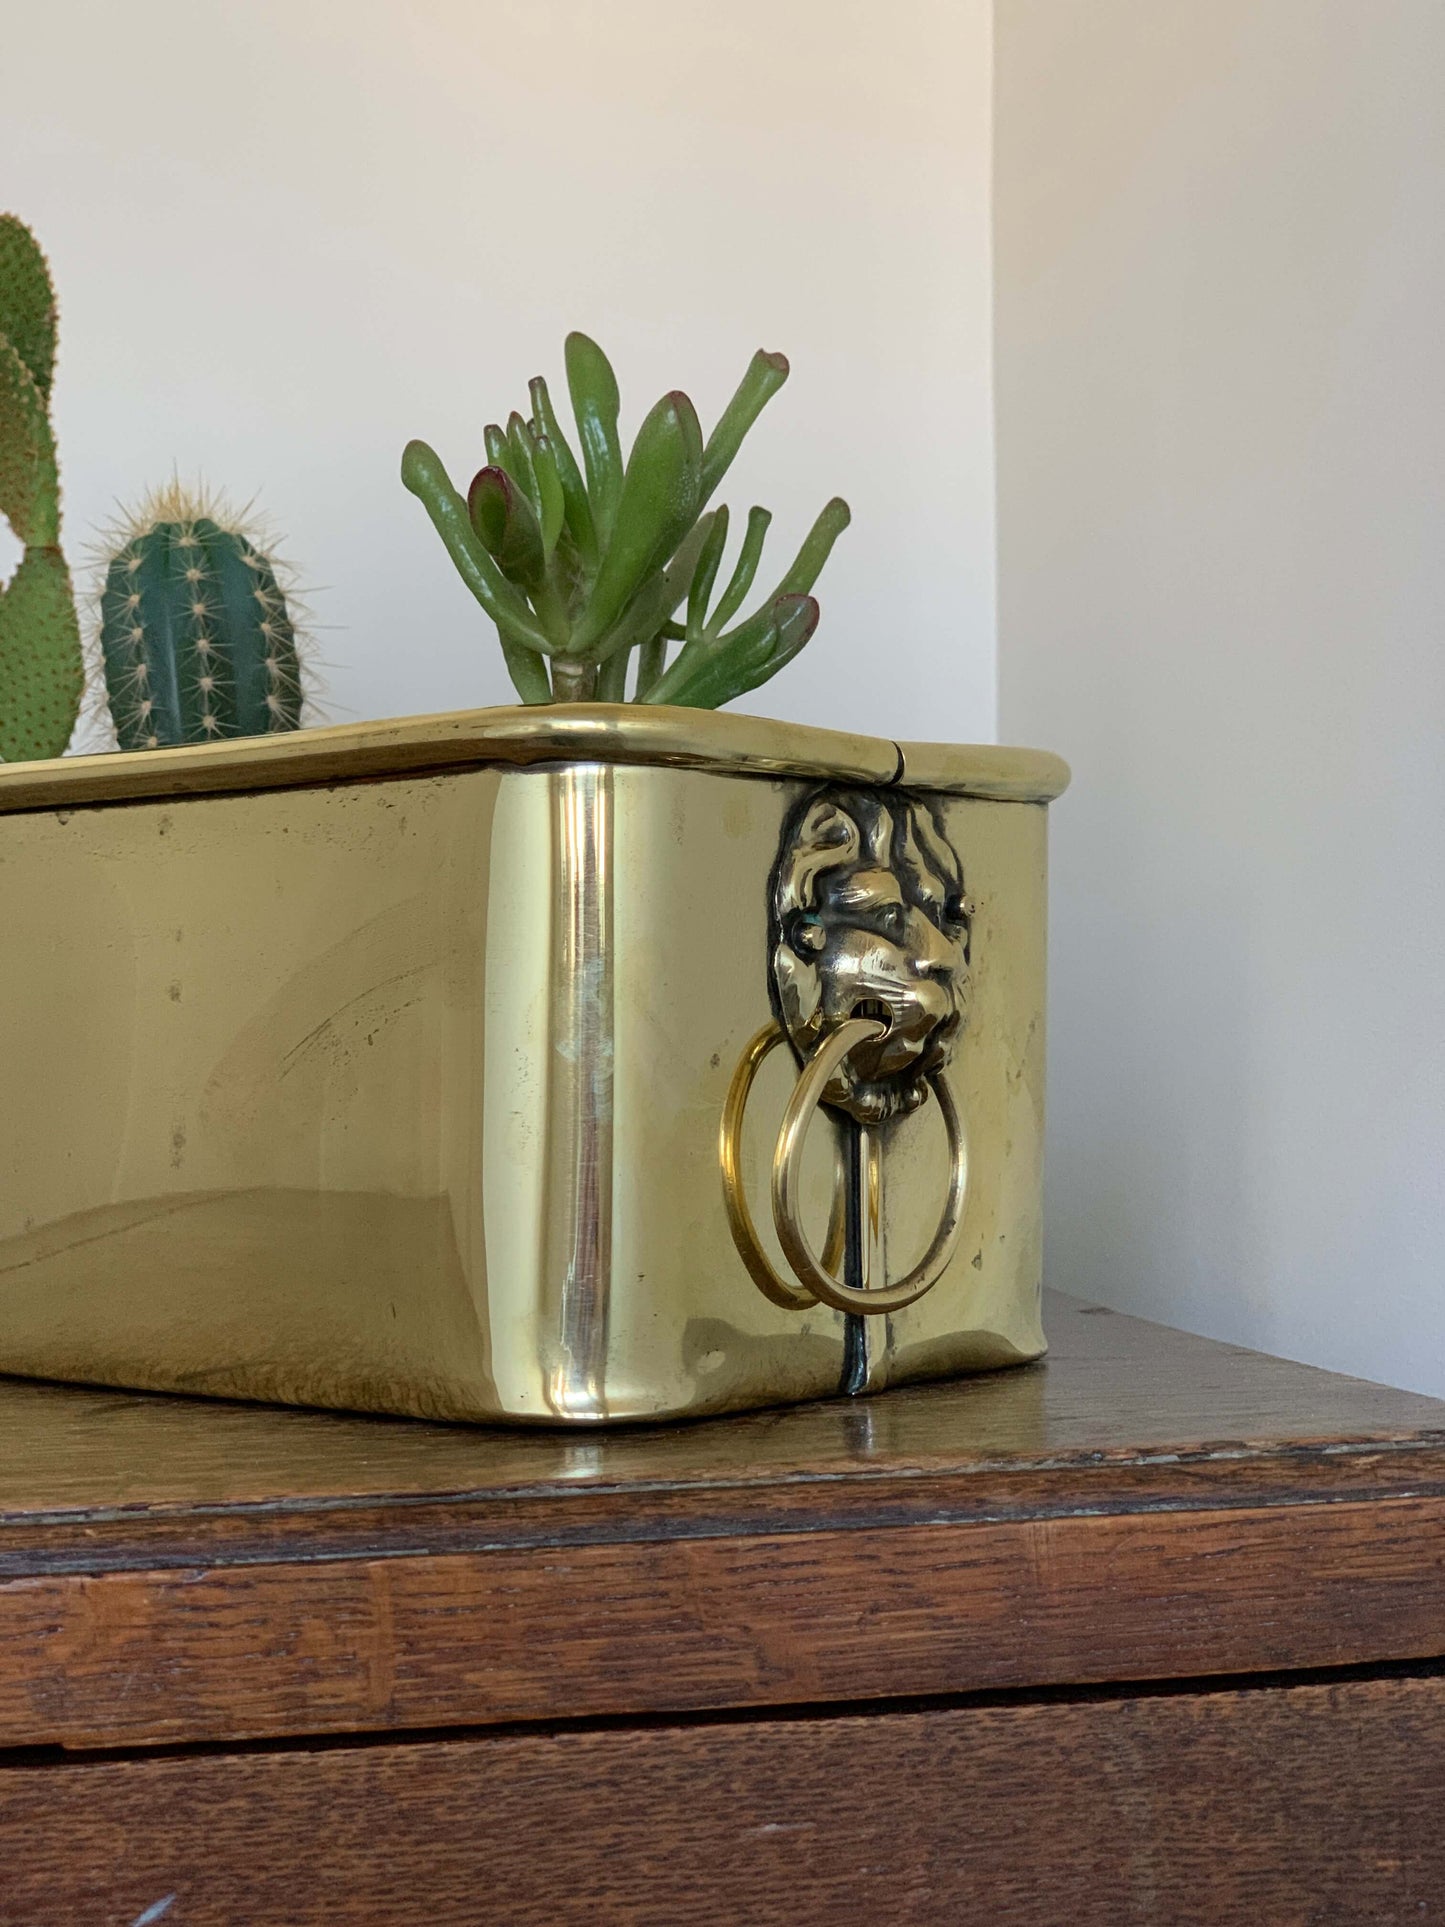 Antique brass and copper planters